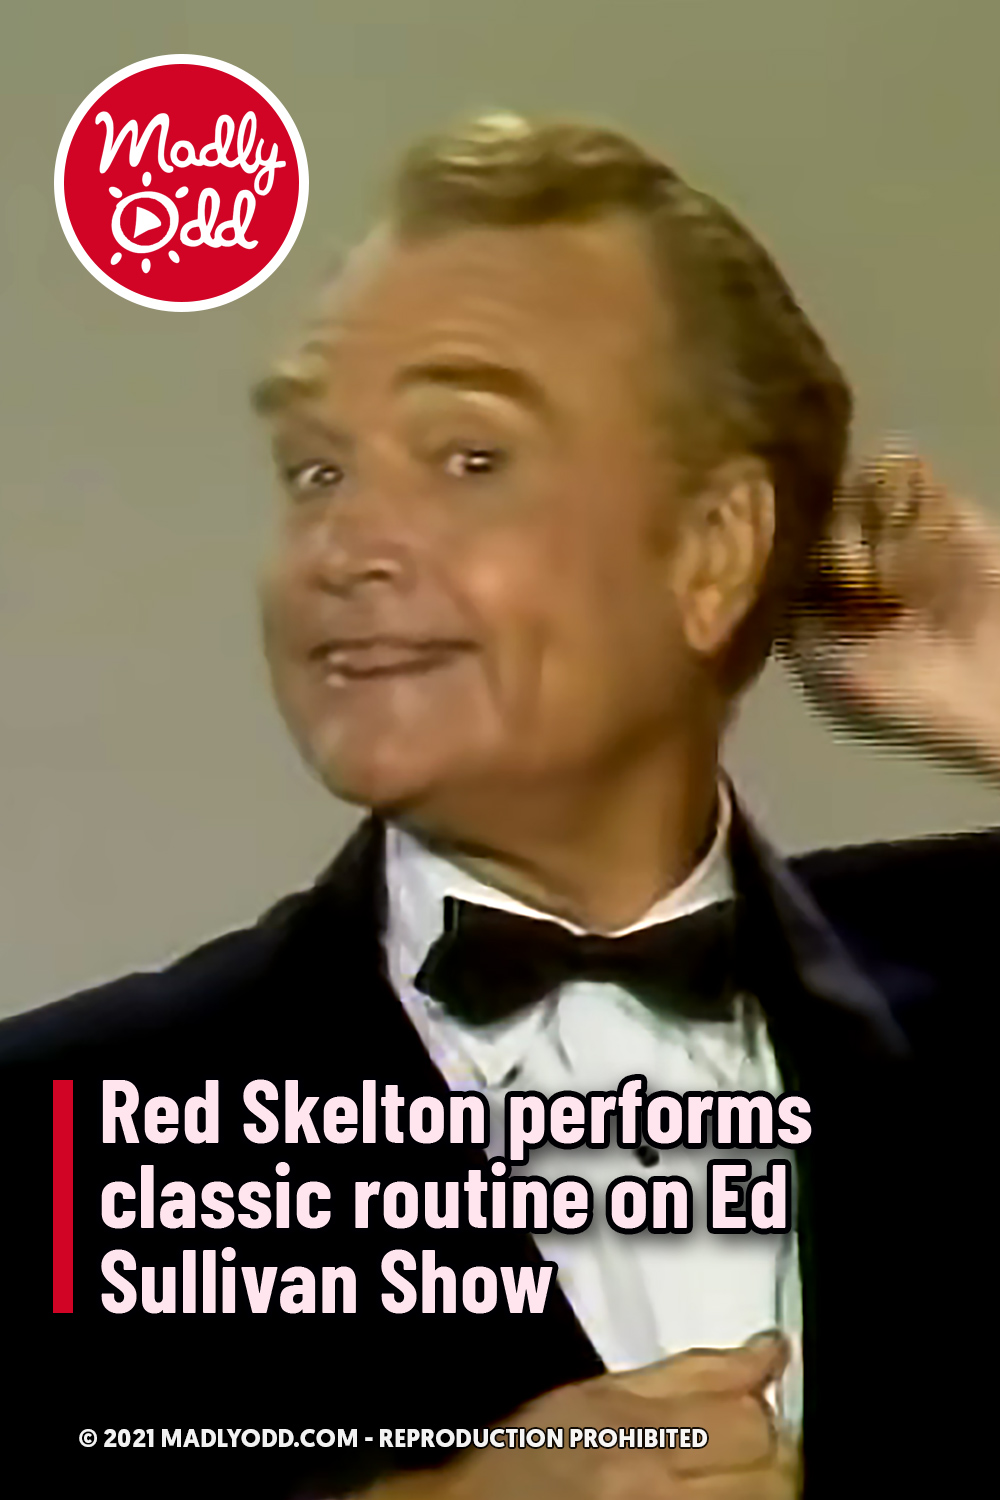 Red Skelton performs classic routine on Ed Sullivan Show